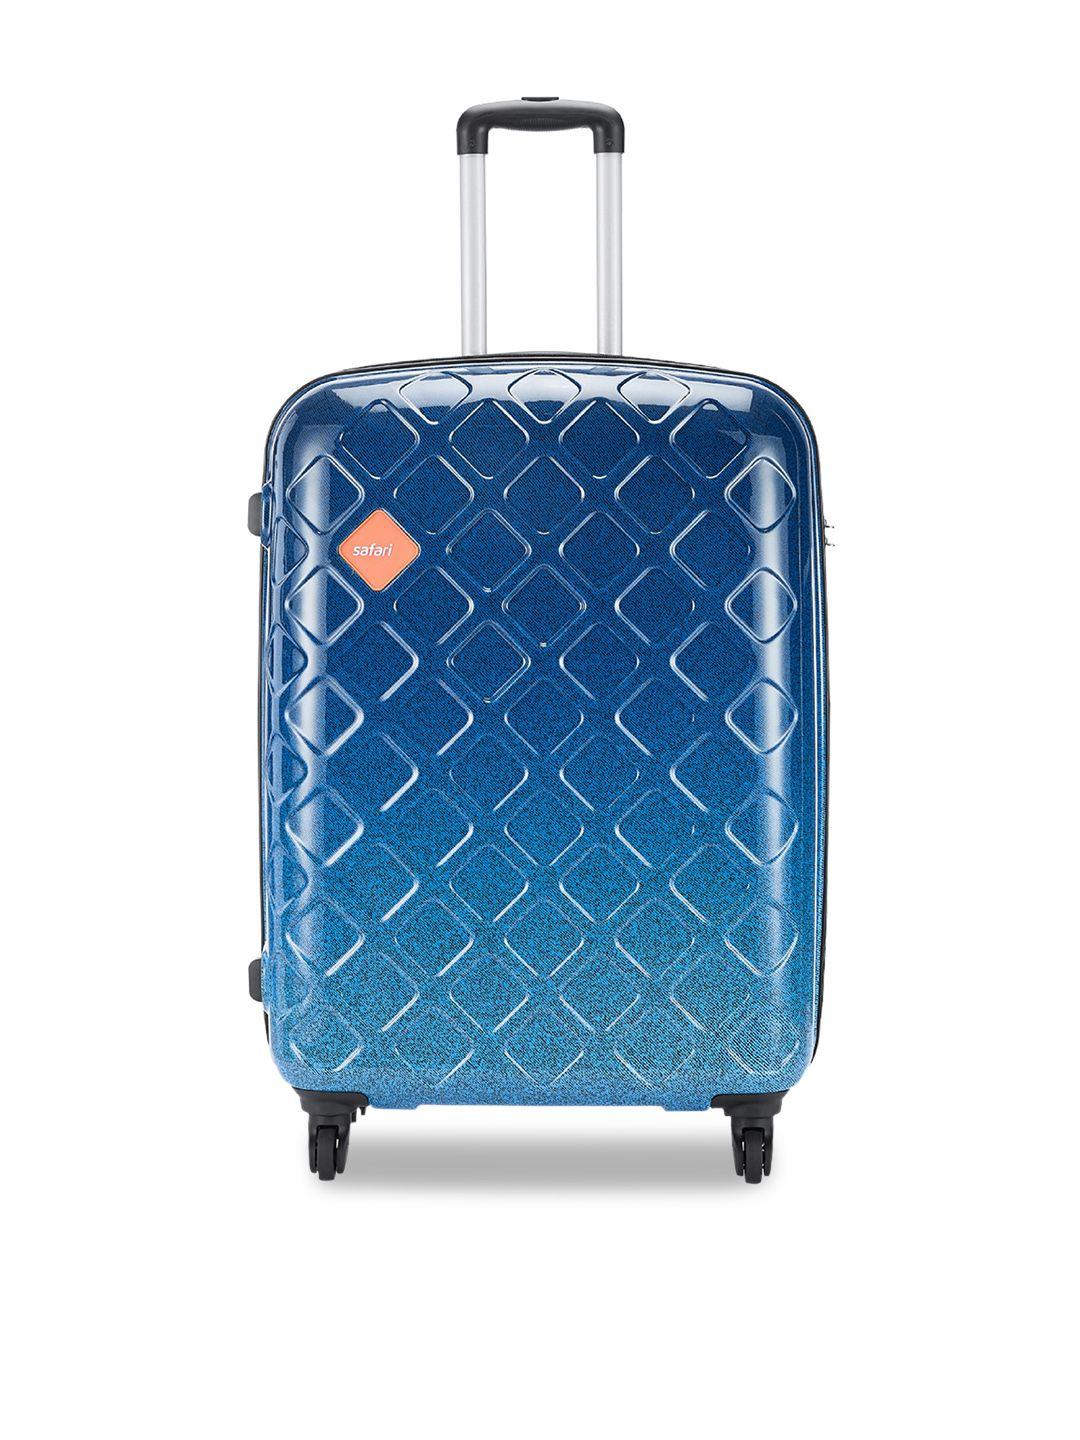 safari blue mosaic ombre large printed polycarbonate trolley